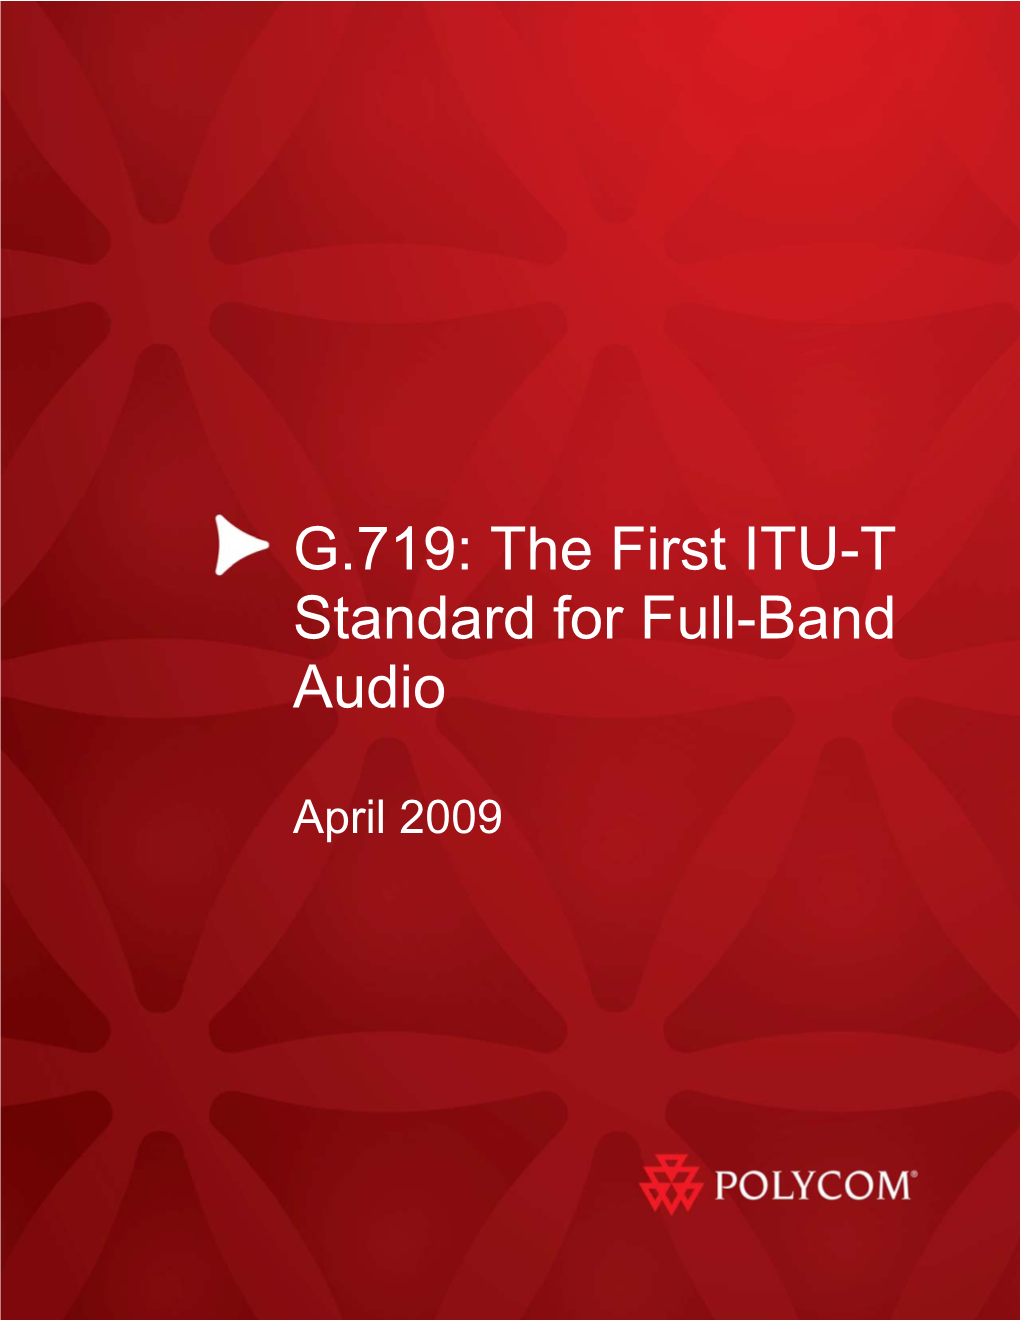 G.719: the First ITU-T Standard for Full-Band Audio